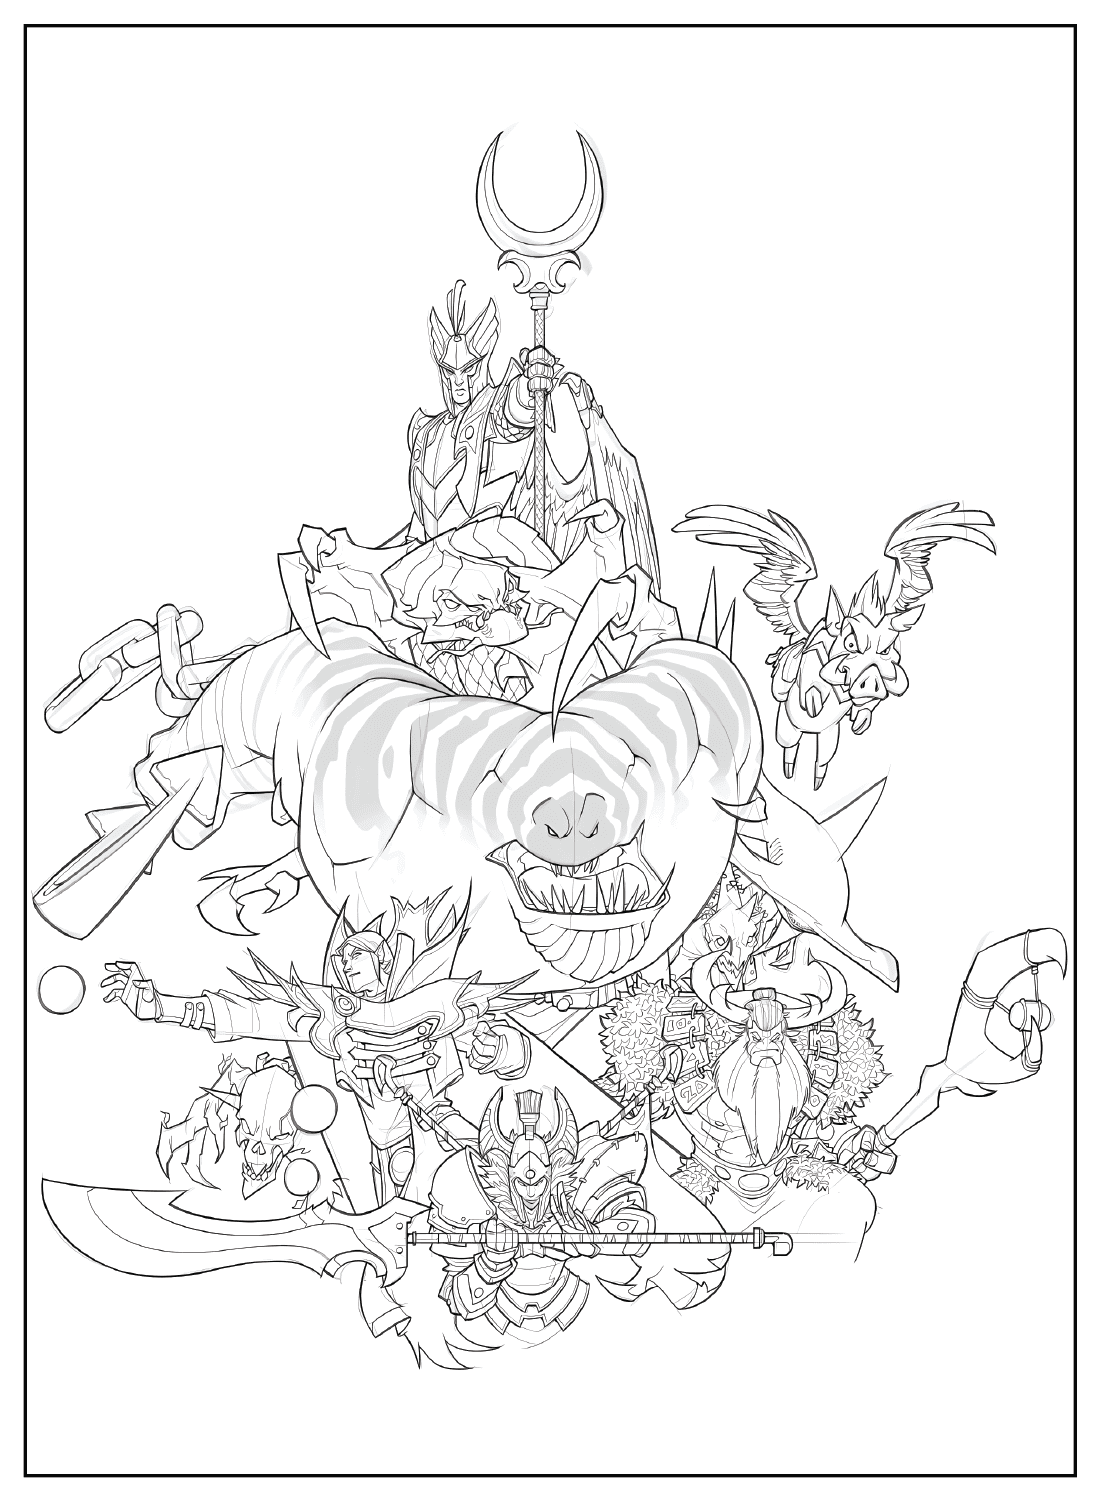 Tide and team Coloring Page from Dota 2